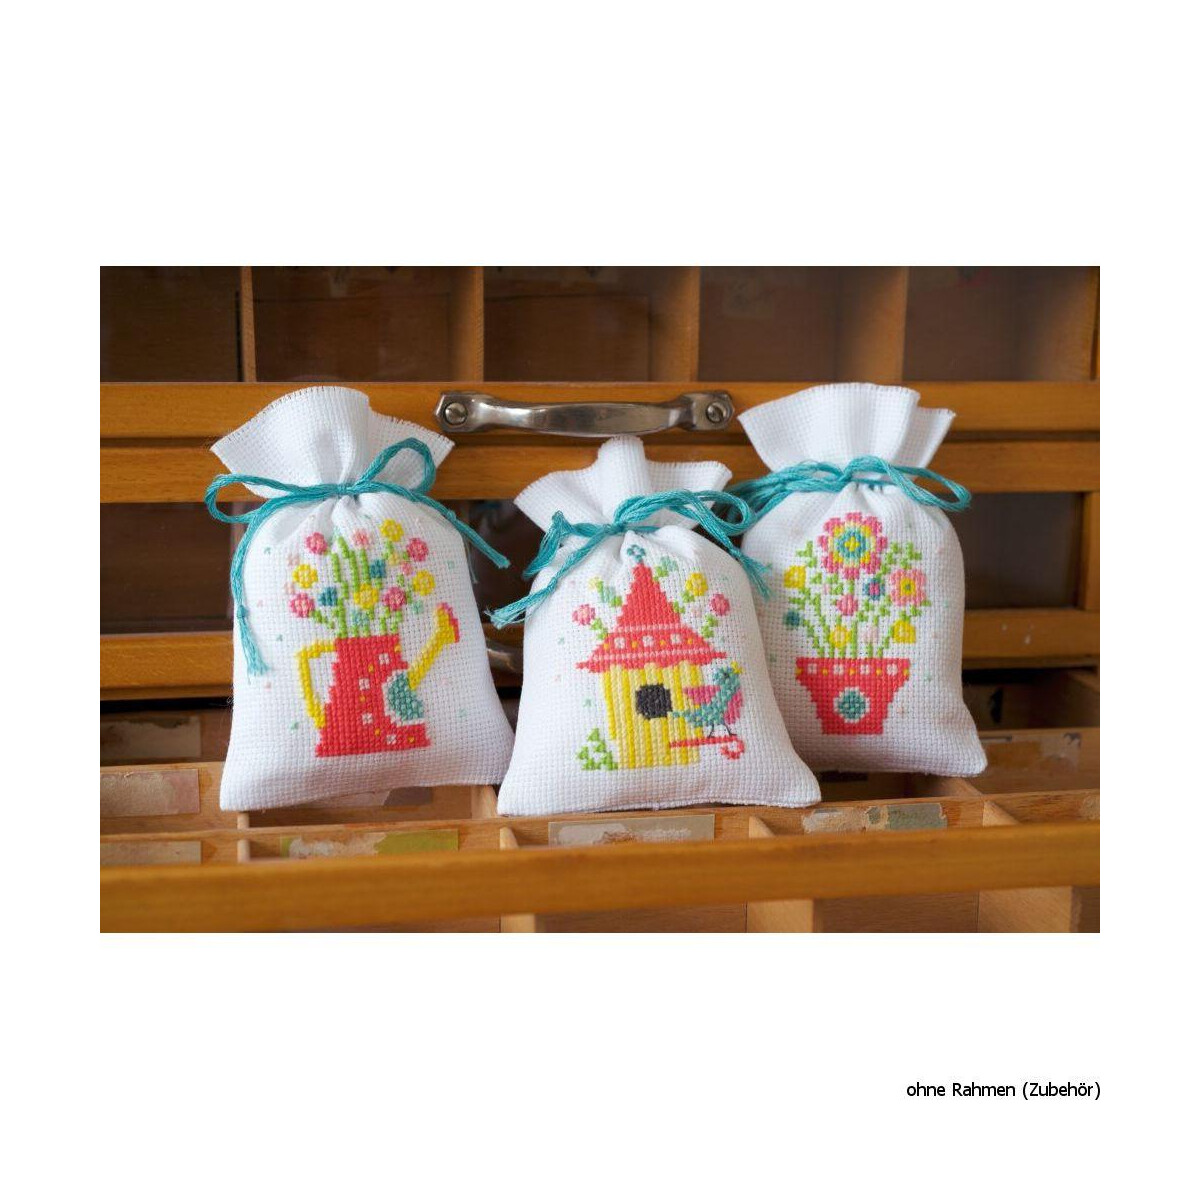 Vervaco counted herbal bags stitch kit Spring kit of 3, DIY